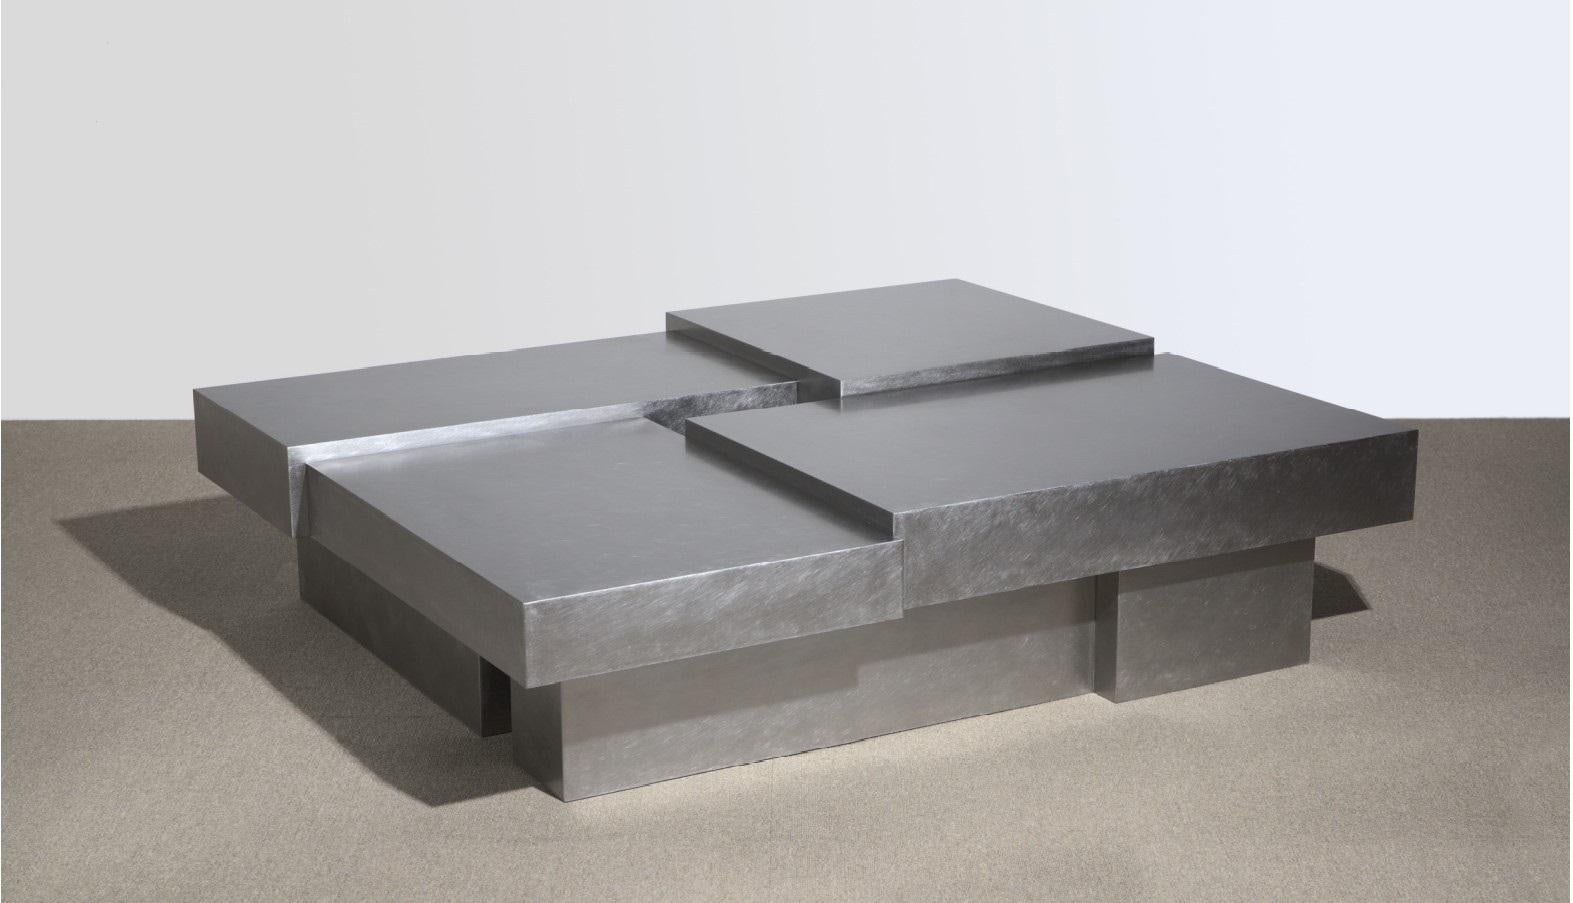 Layered steel coffee table II by Hyungshin Hwang
Dimensions: D 160 x W 120 x H 42 cm
Materials: stainless steel

Layered Series is the main theme and concept of work of Hwang, who continues his experiment which is based on architectural